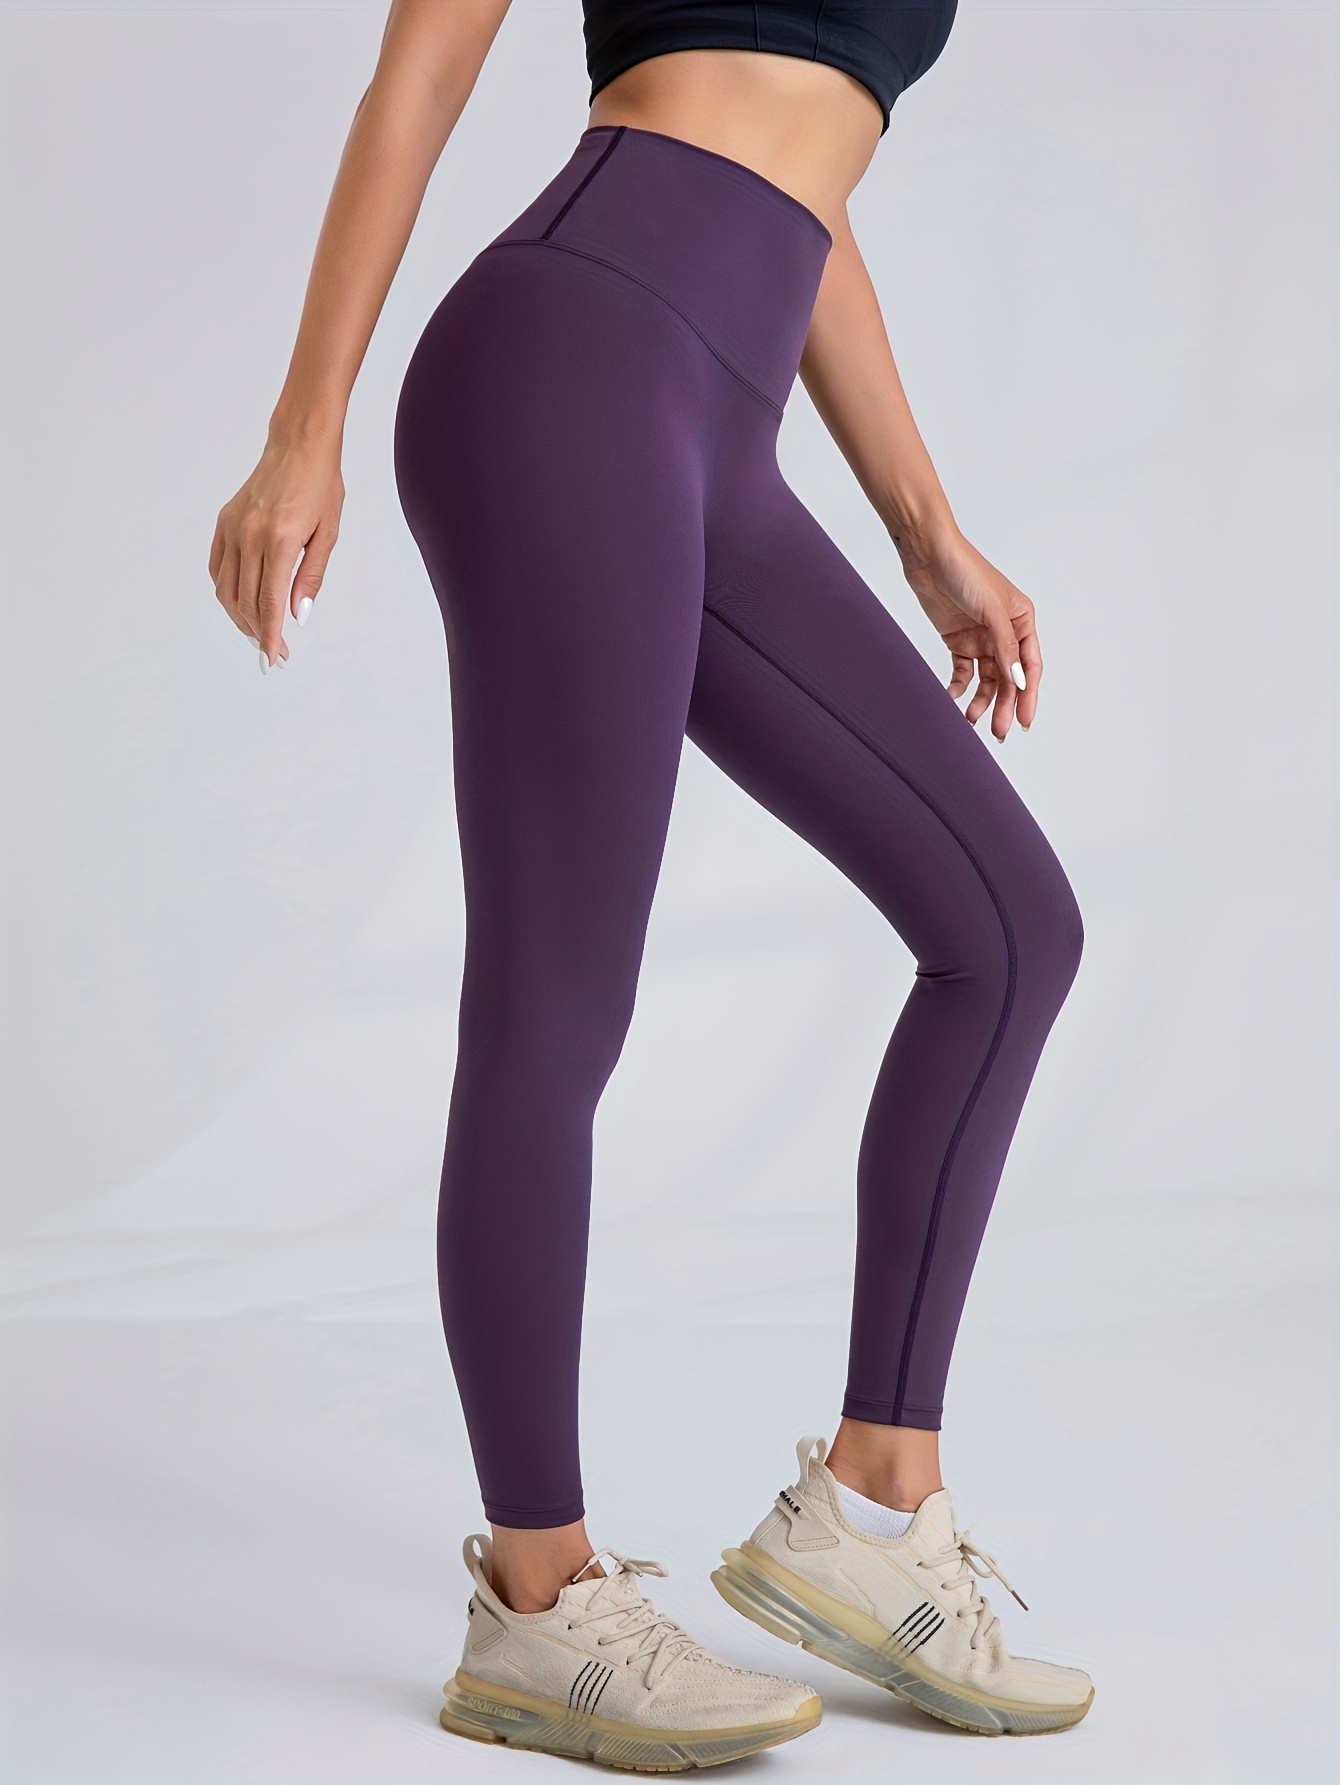 Sexy Skinny Stretchy Foot Pants For Women Body Shaping Purple Leggings For  Spring, Casual Streetwear And Wild Female Bottoms 211215 From Luo02, $10.38